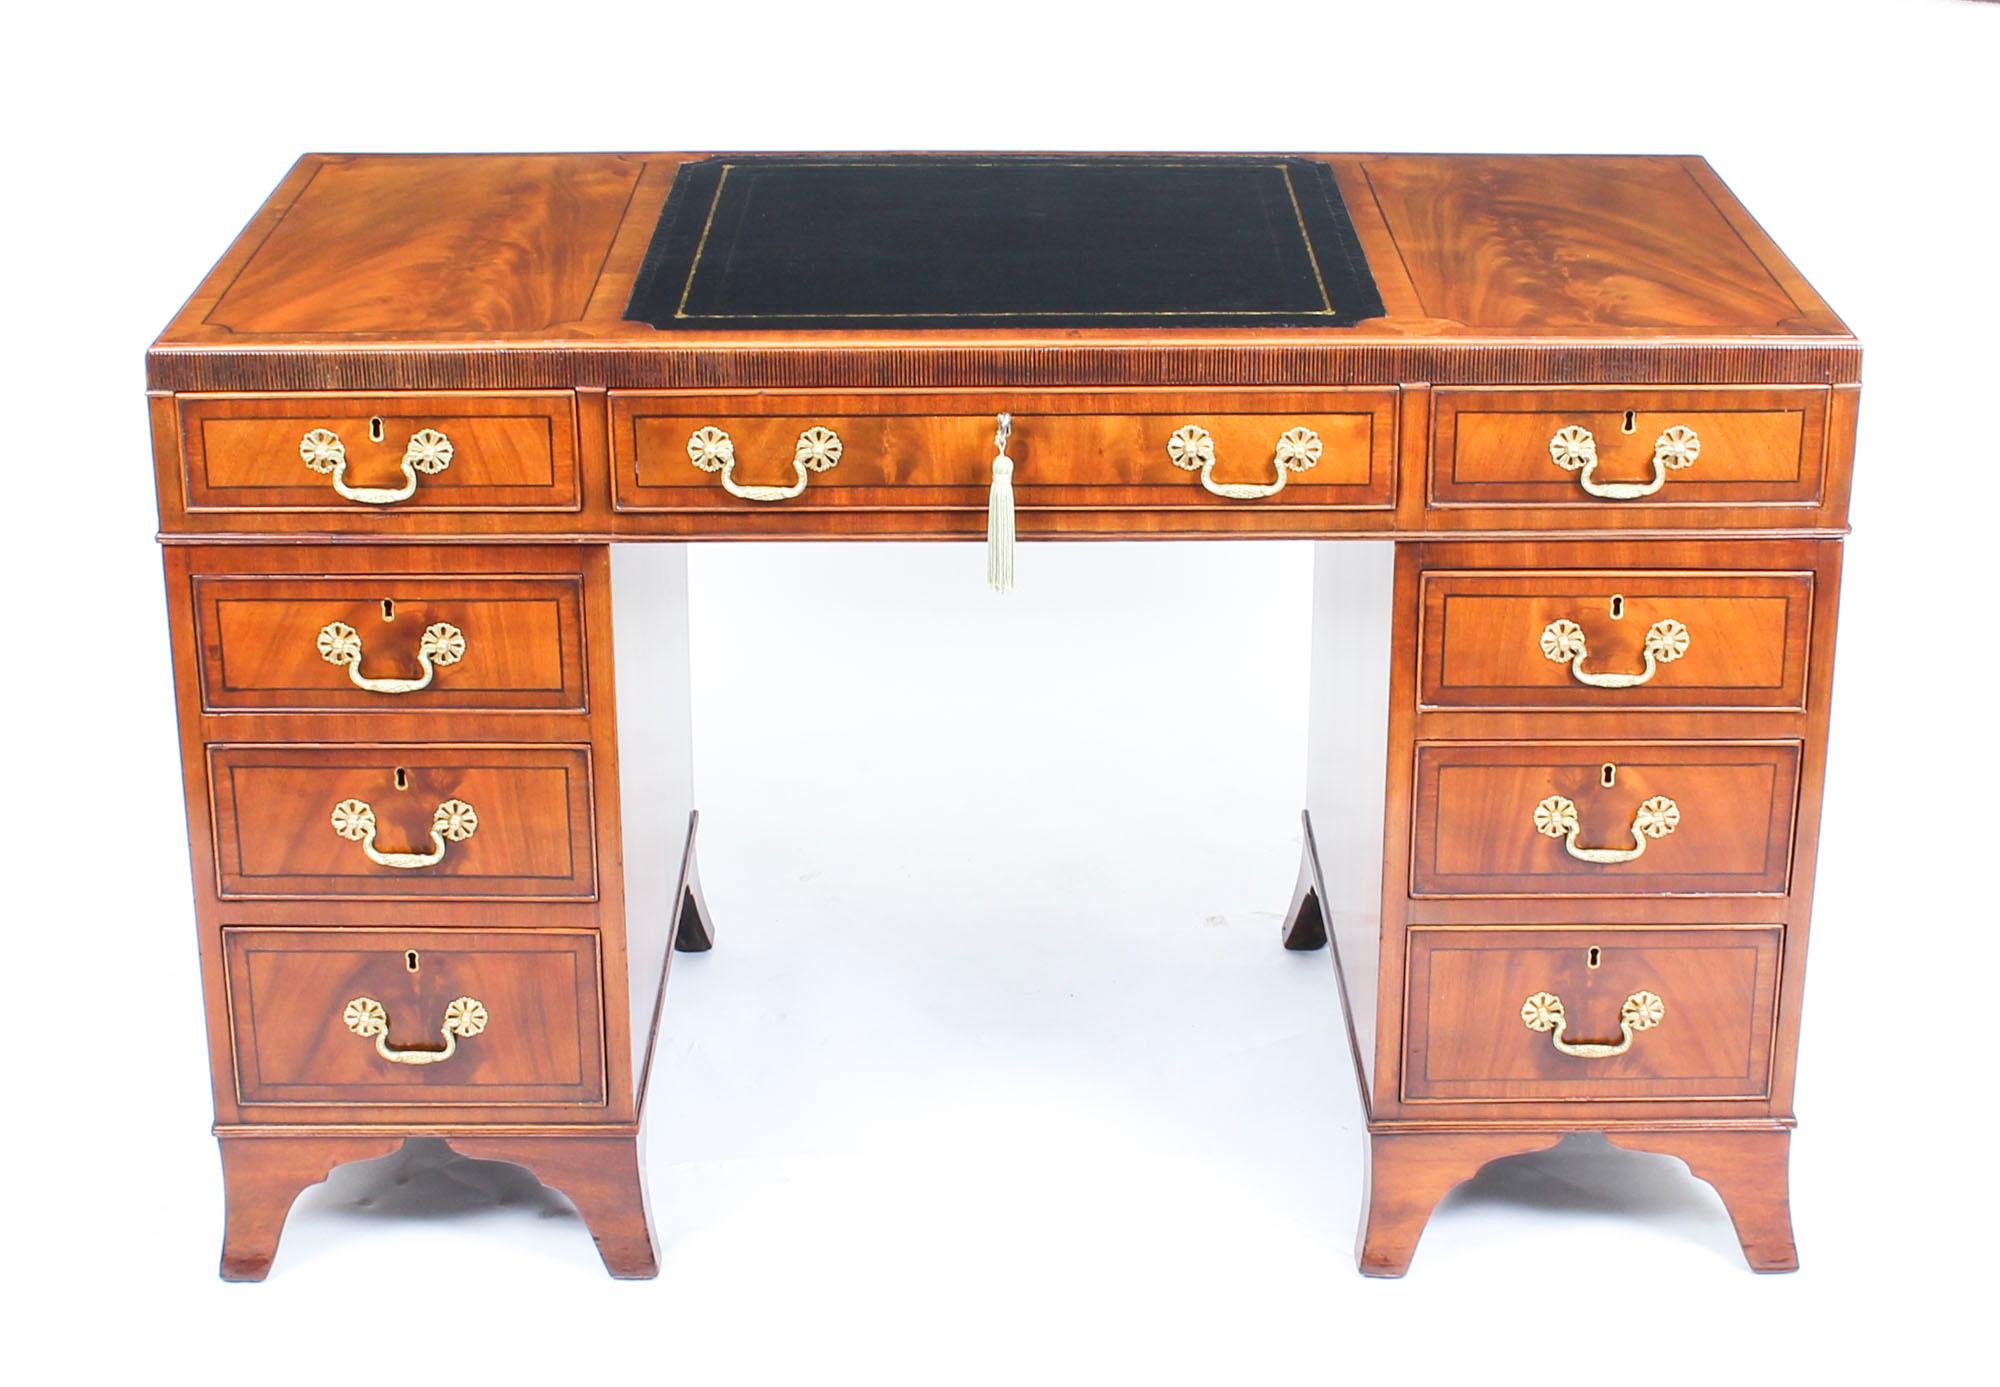 This is a fine antique late Victorian mahogany caddy top pedestal desk, circa 1880 in date.
 
This desk is made from beautiful flame mahogany with ebonized stringing and crossbanding. It features a stunning gilt tooled black leather writing